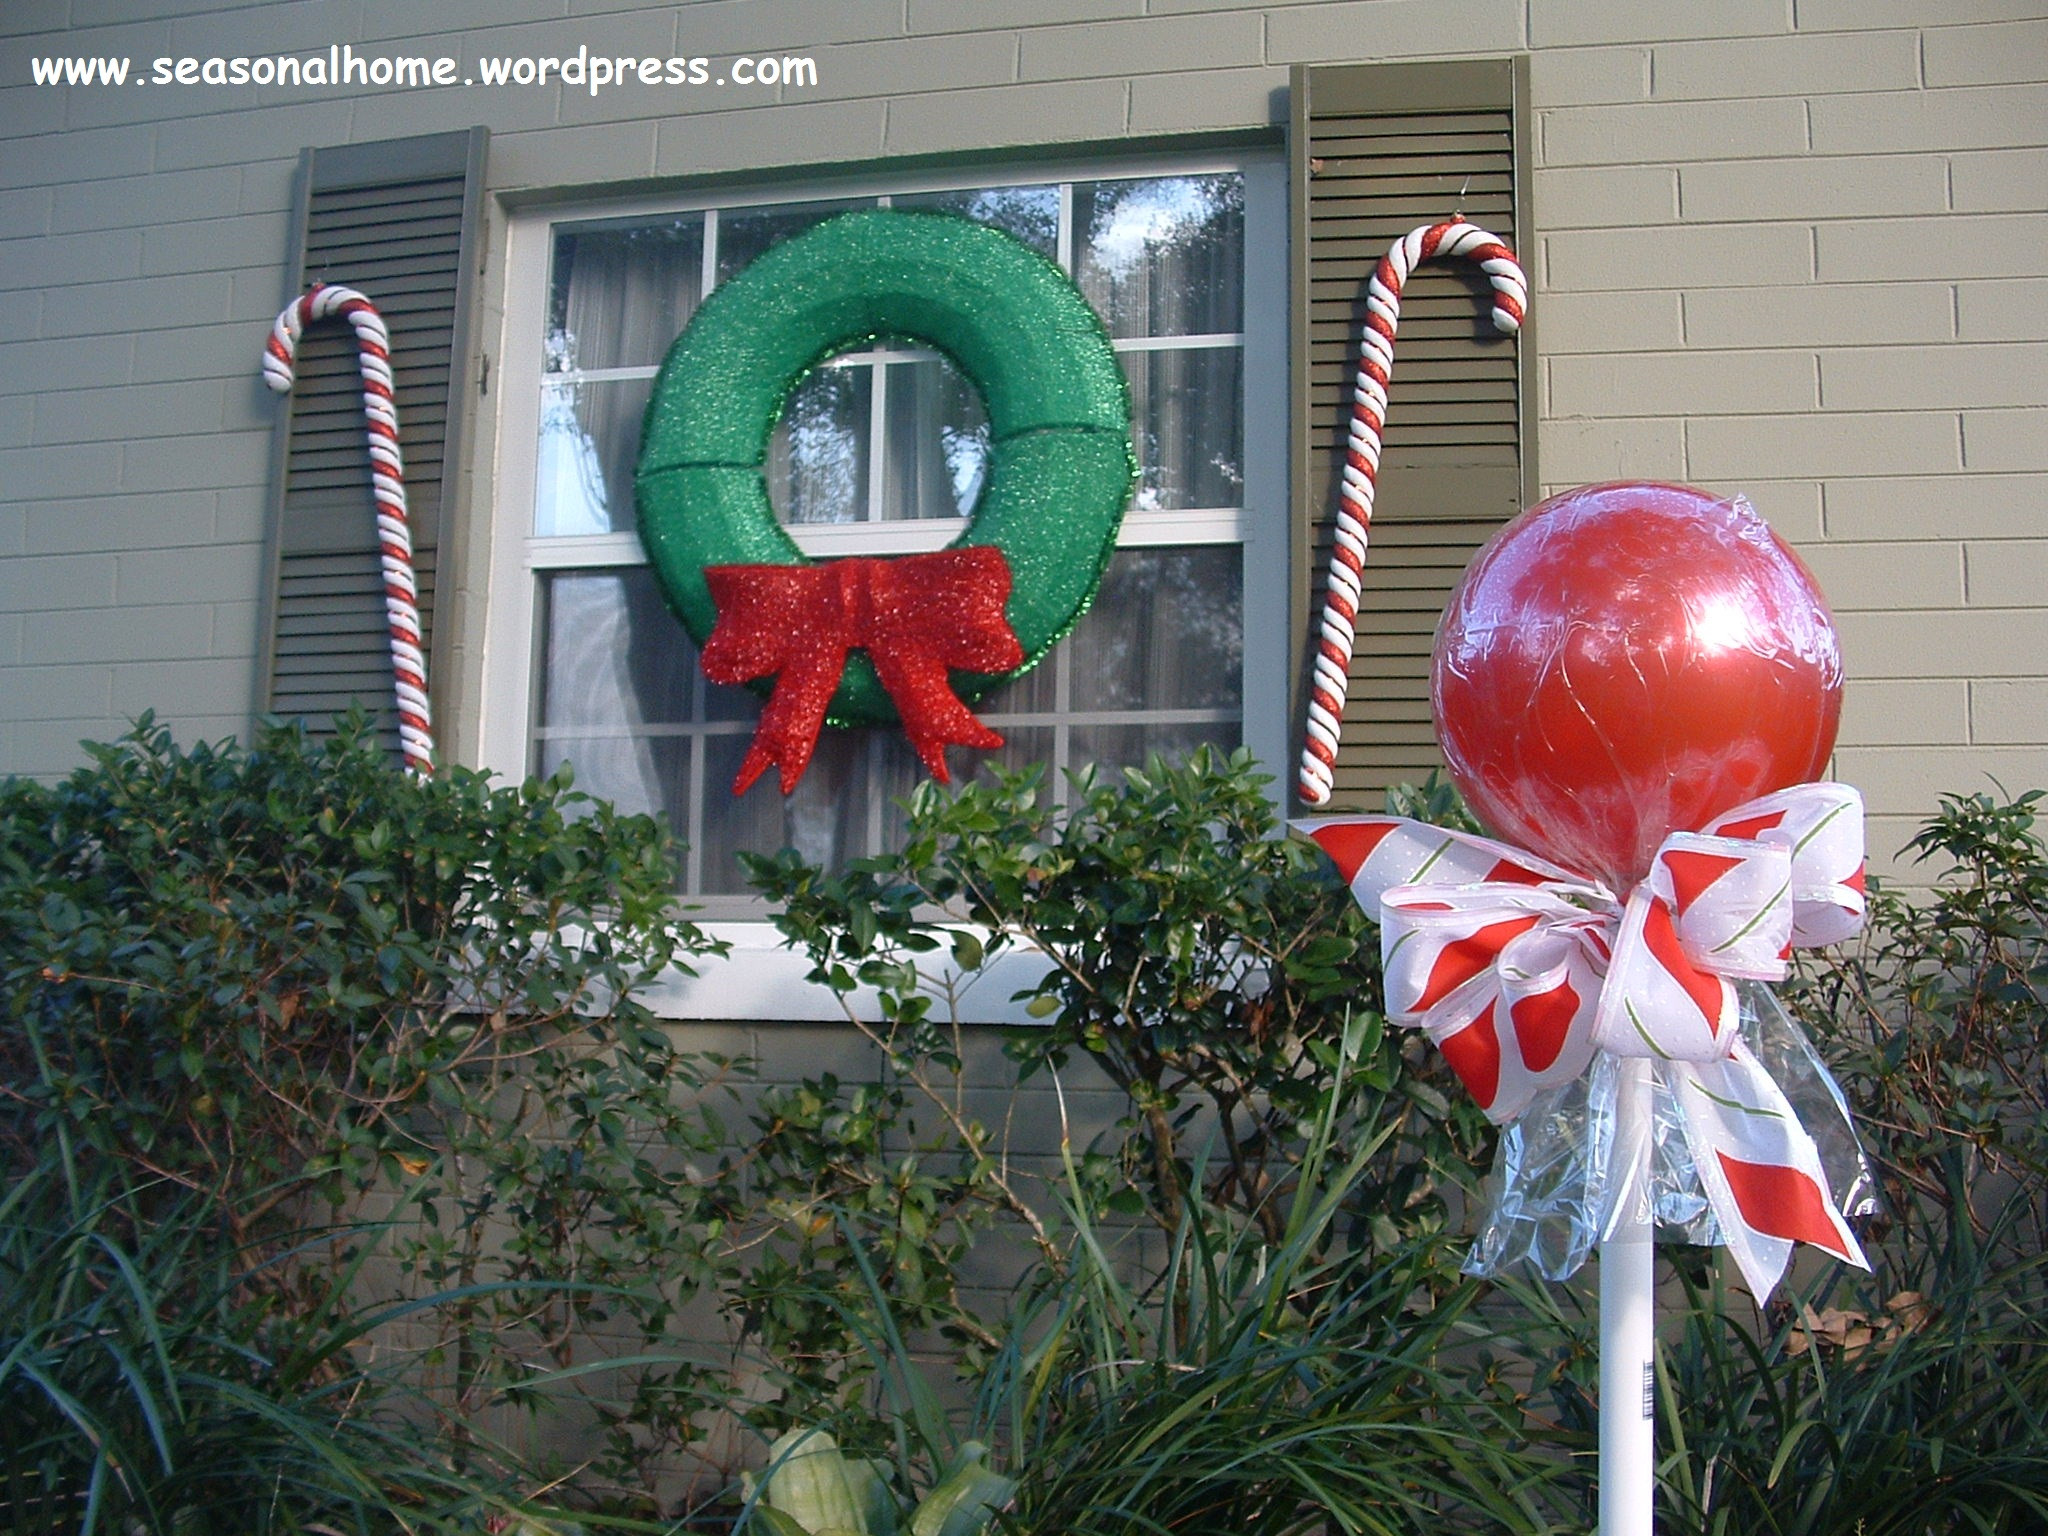 Outdoor Christmas Candy Canes
 Time to start on those Christmas yard art Subject Candy